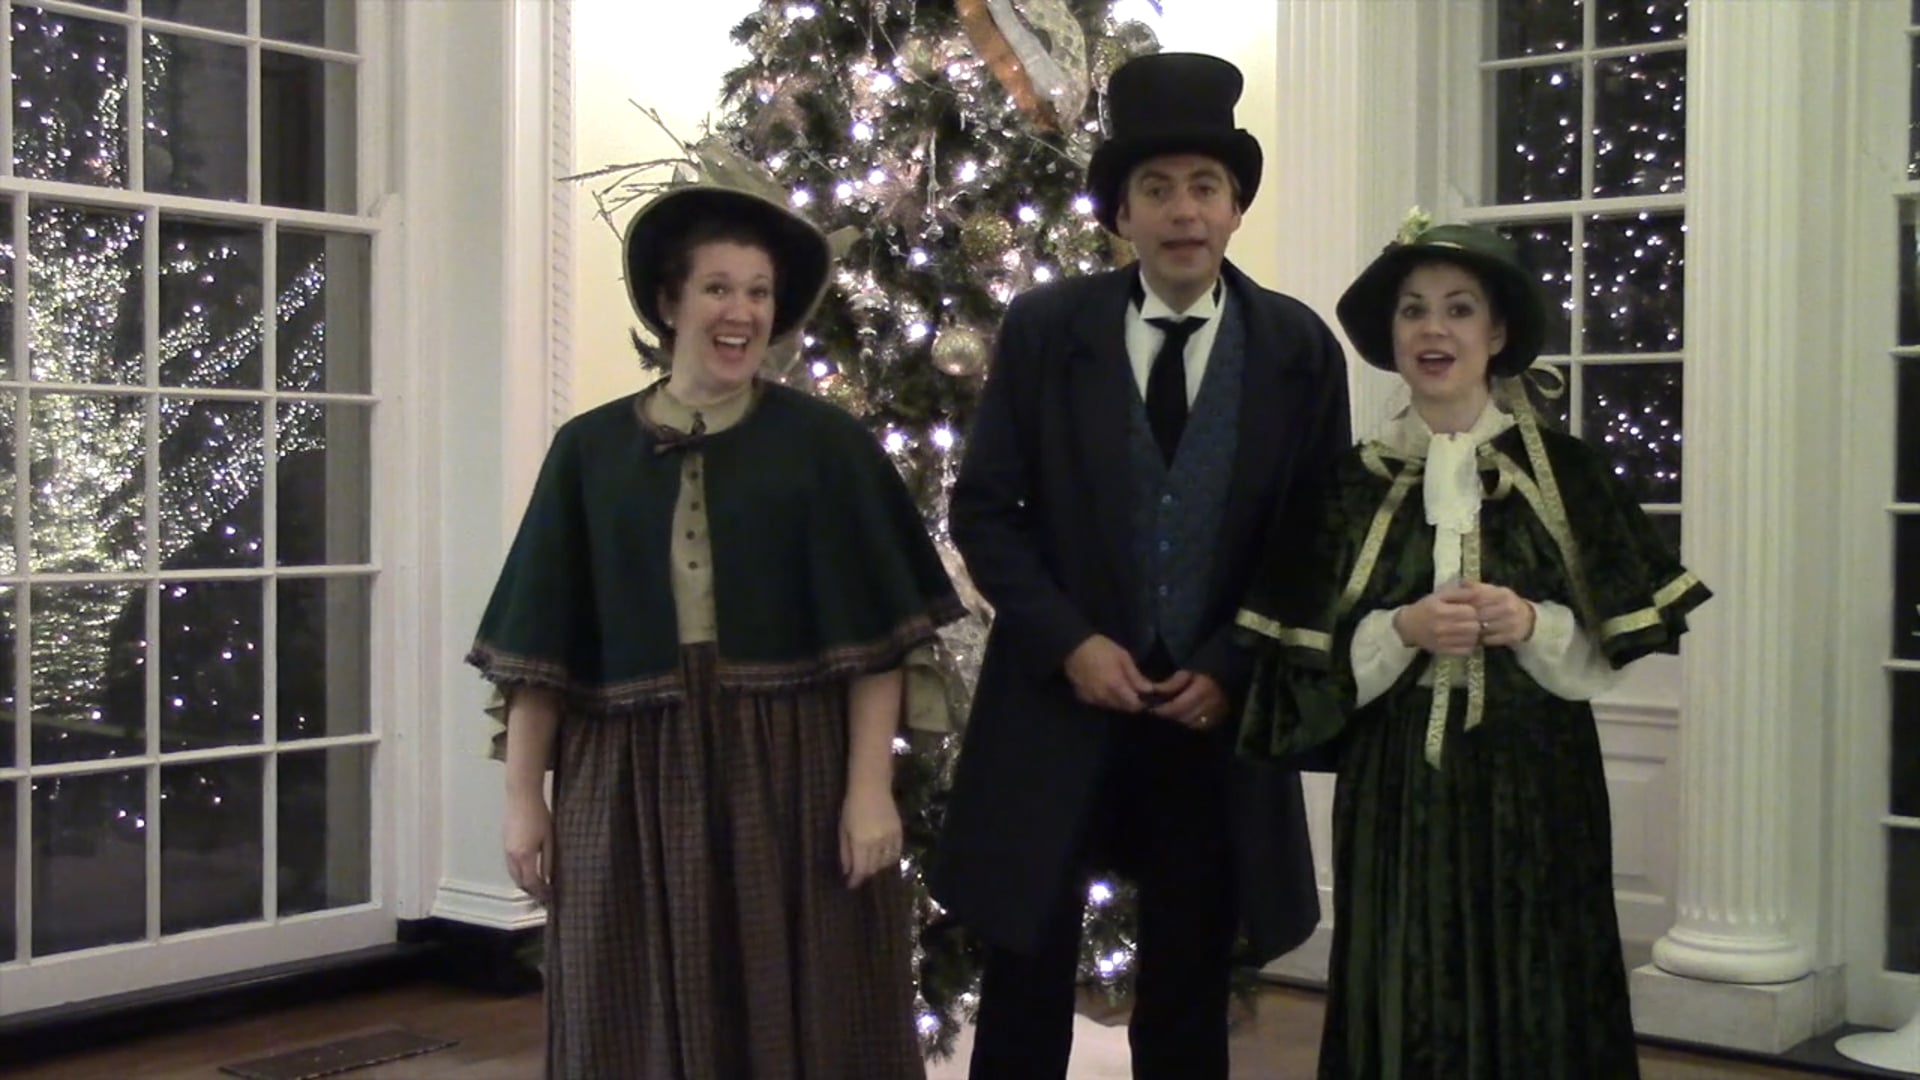 Promotional video thumbnail 1 for The American Caroling Company